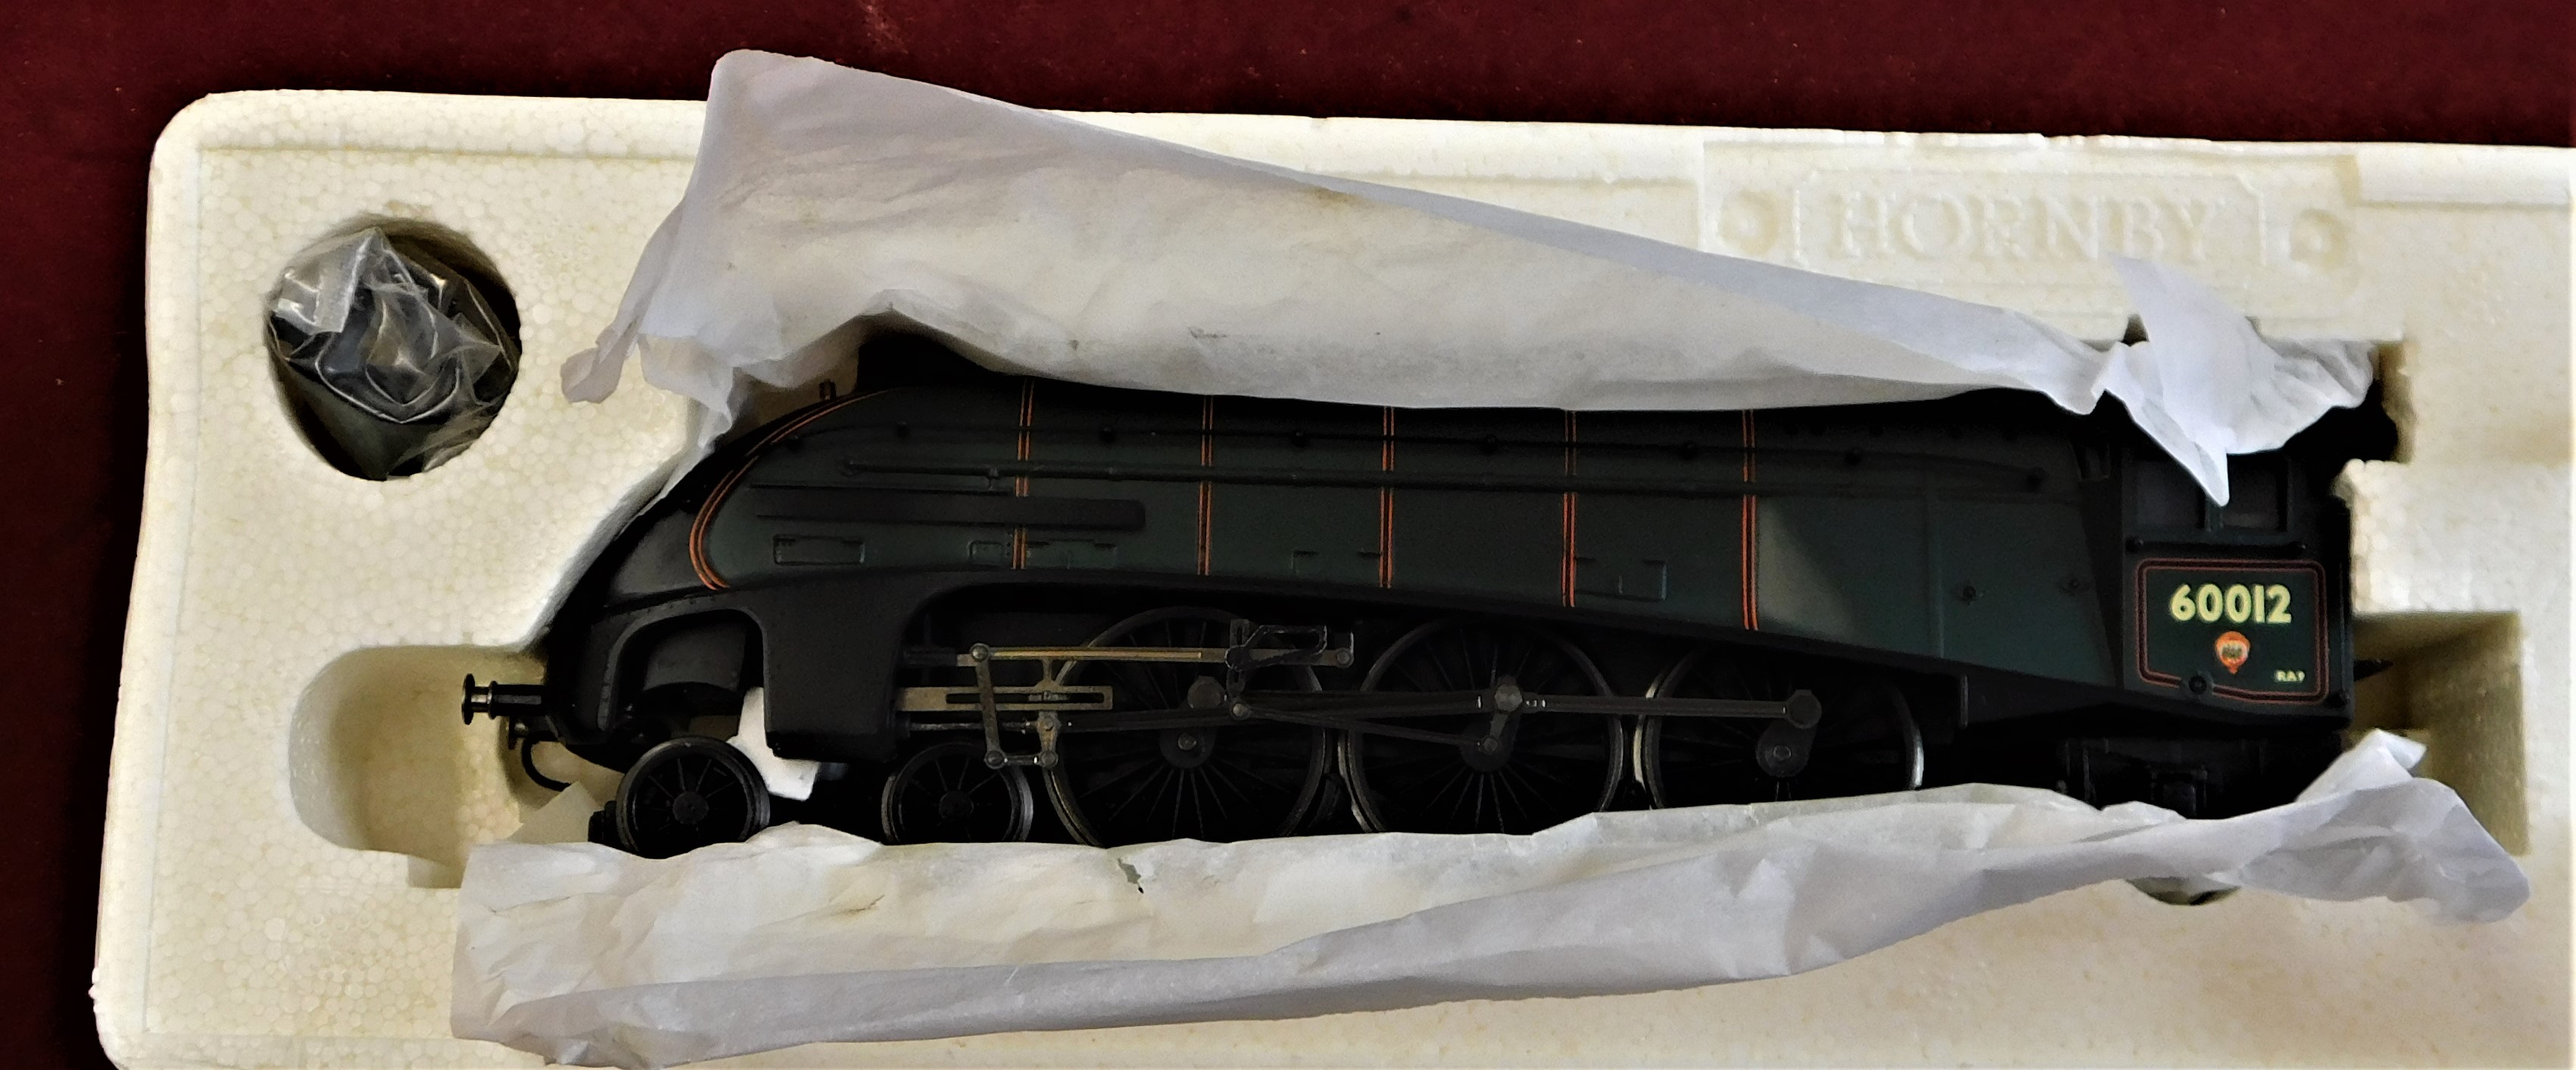 Hornby Class 4A Locomotive "Commonwealth of Australia" R2136. Mint in box. - Image 4 of 4